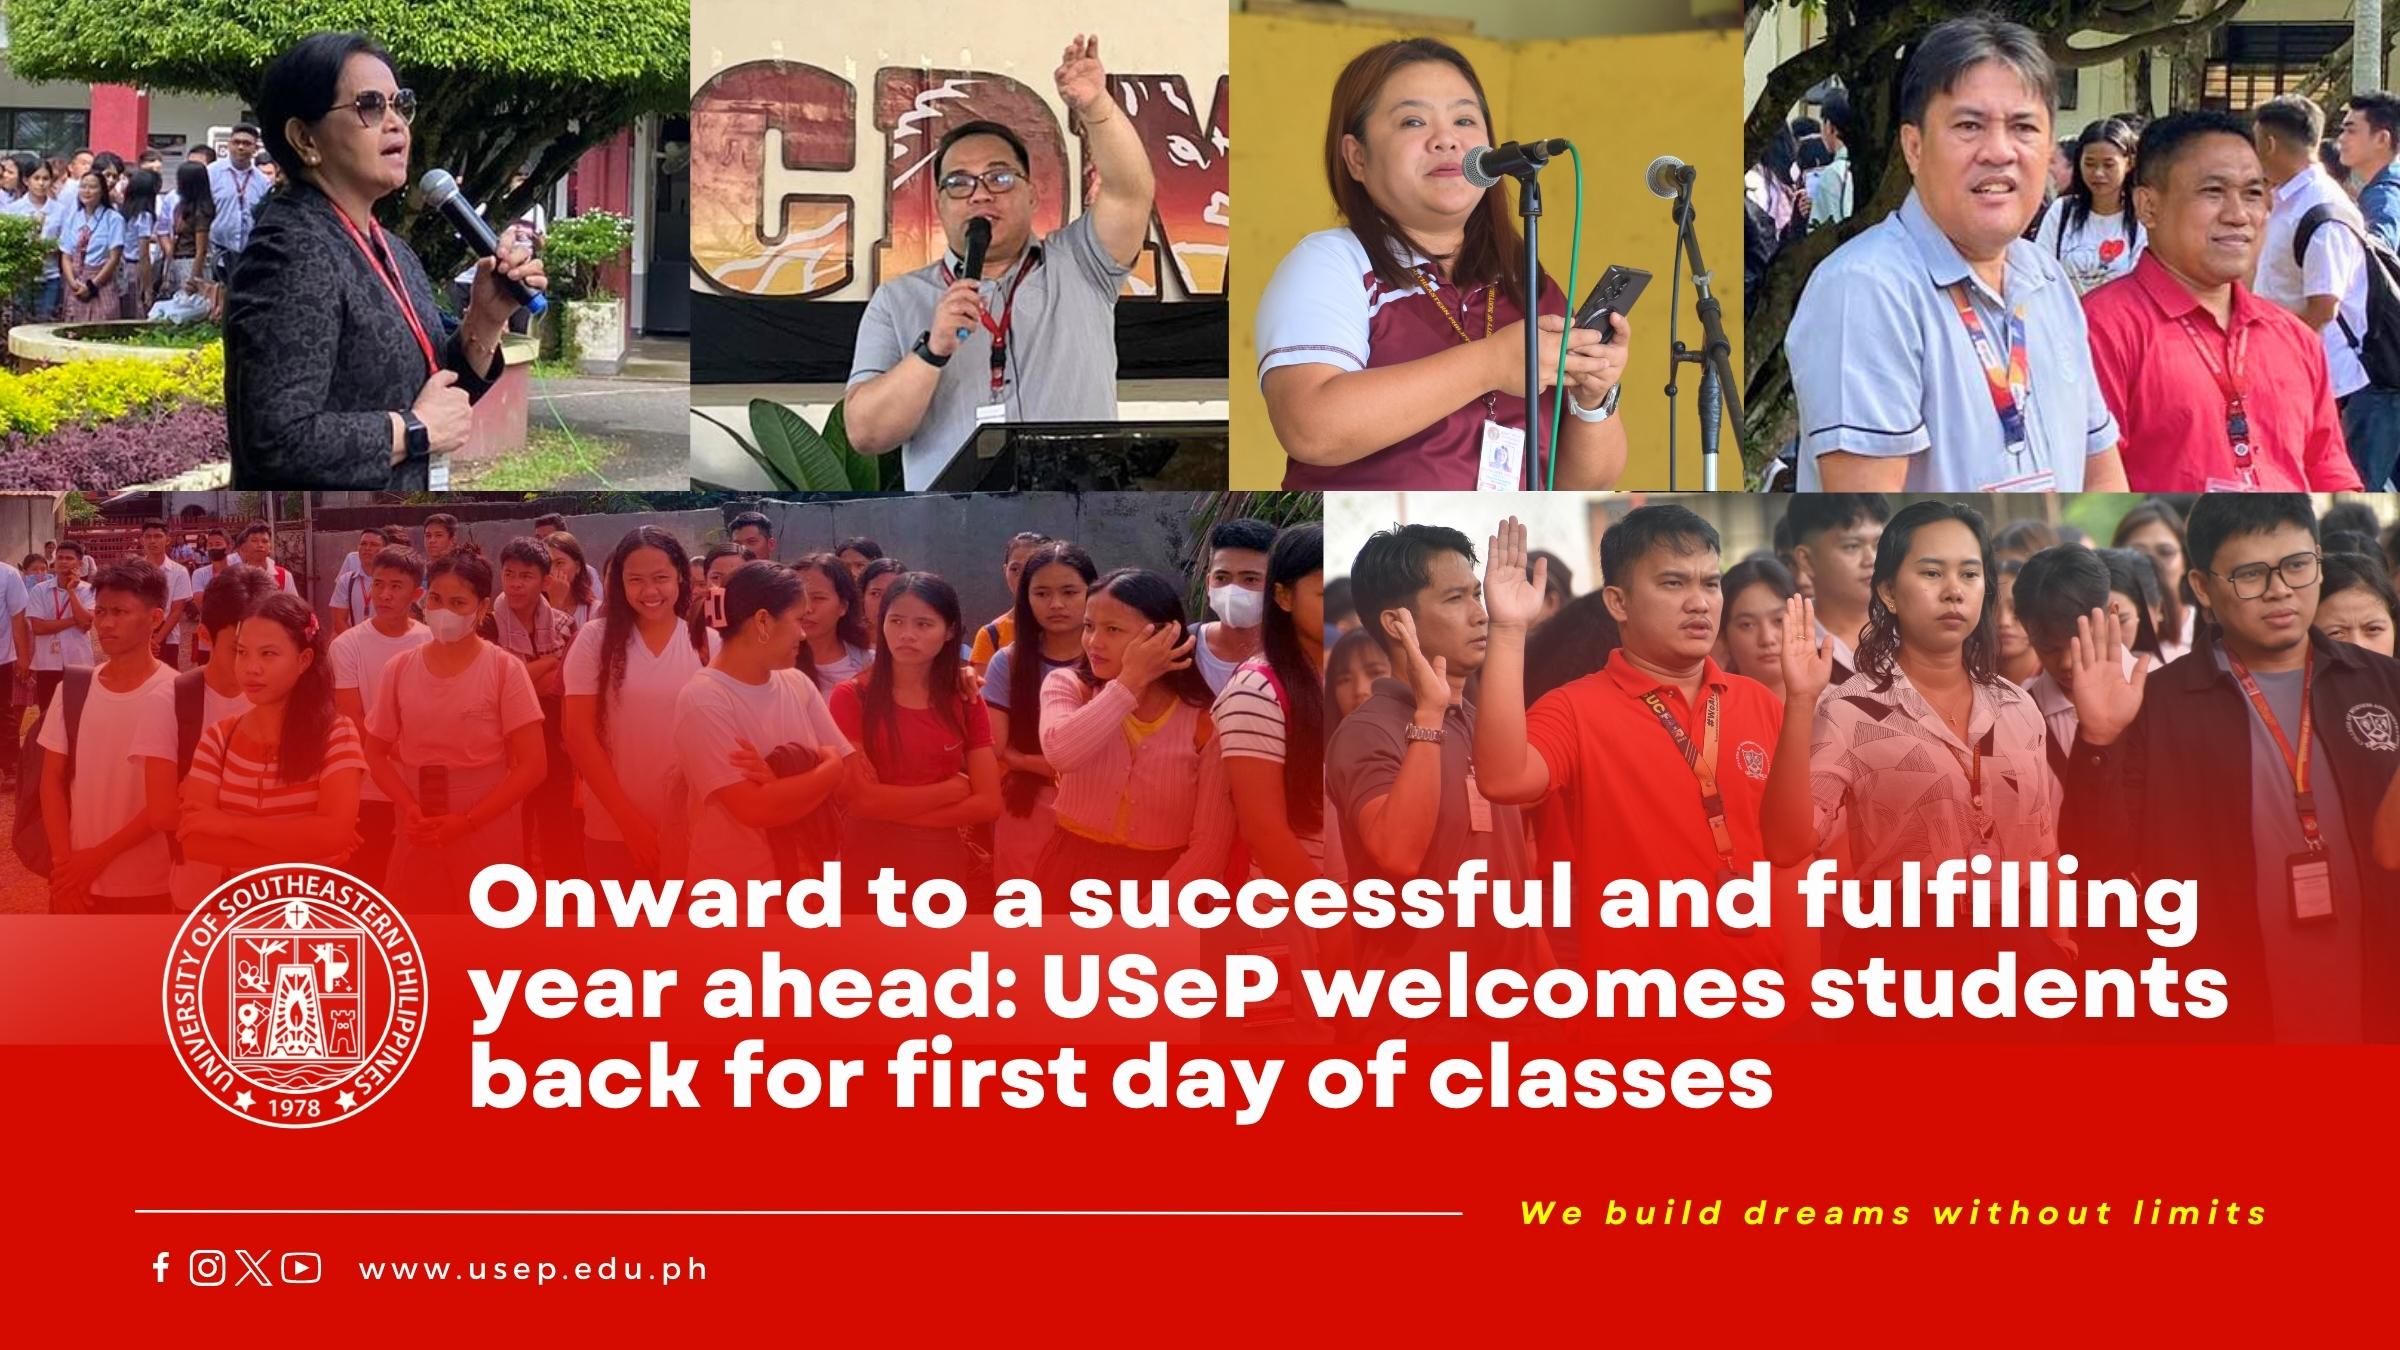 Onward to a successful and fulfilling year ahead: USeP welcomes students back for first day of classes